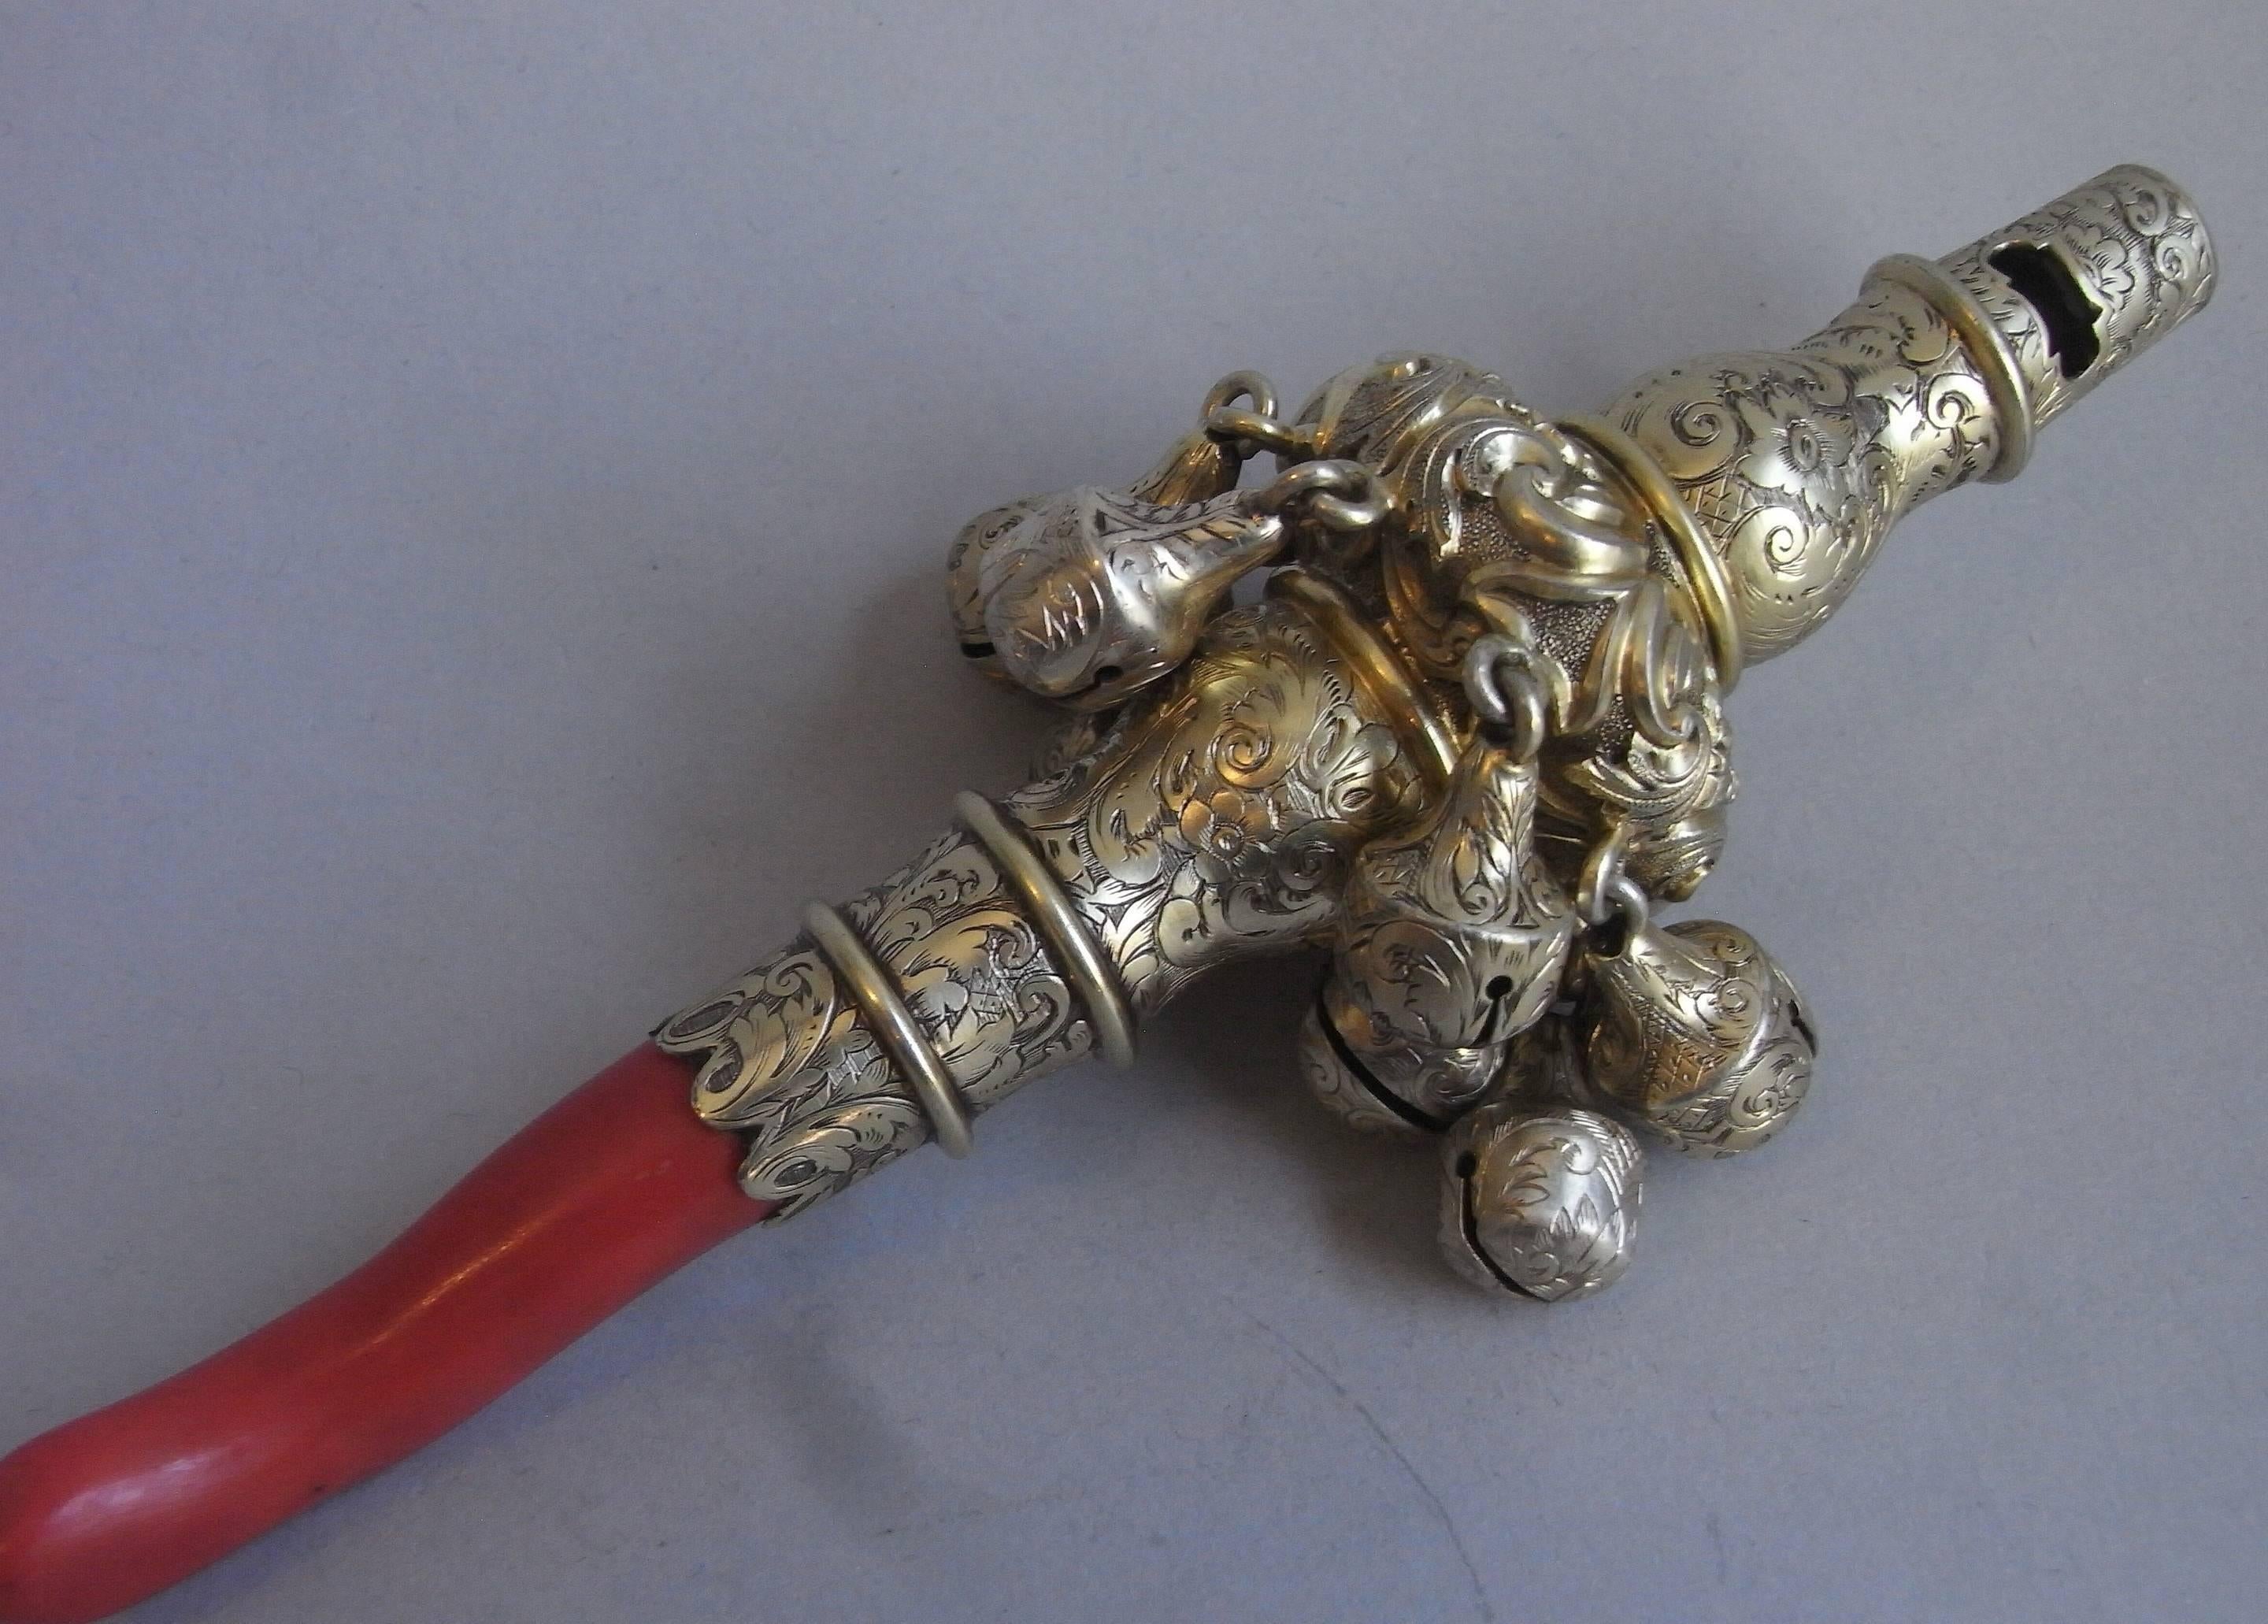 The Rattle is silver gilt and the main shaft has a shaped baluster form, displaying five plain circular raised girdles along its length. The central section is chased with Rococo scrolls and flower heads and the rest of the shaft is beautifully